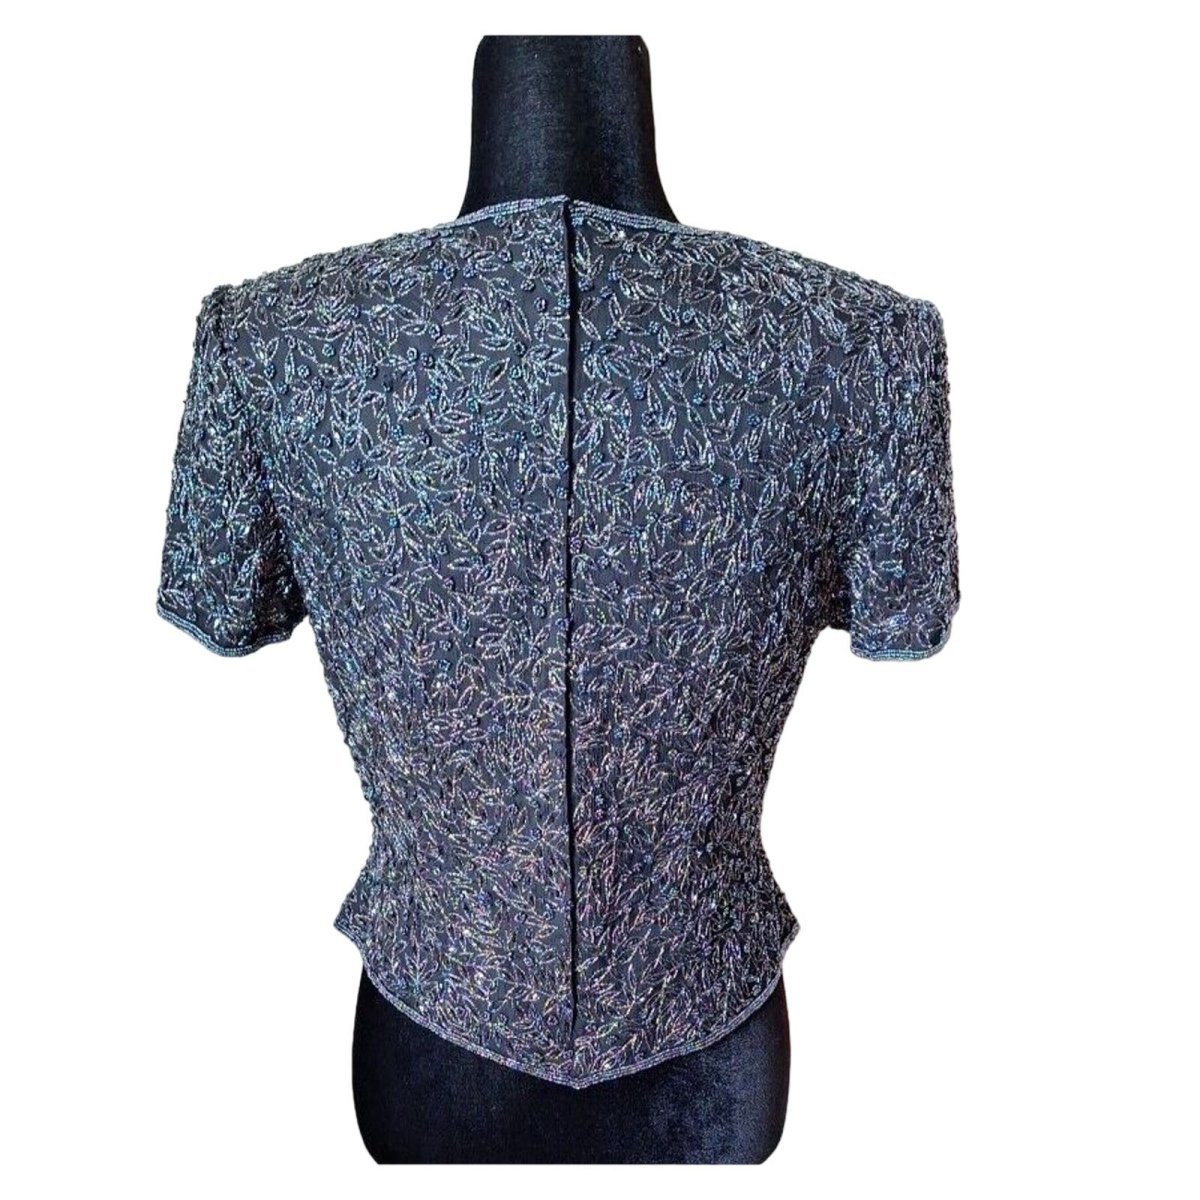 Vintage 90s/Y2K Beaded Cropped Silk Blouse Women Size Medium - themallvintage The Mall Vintage